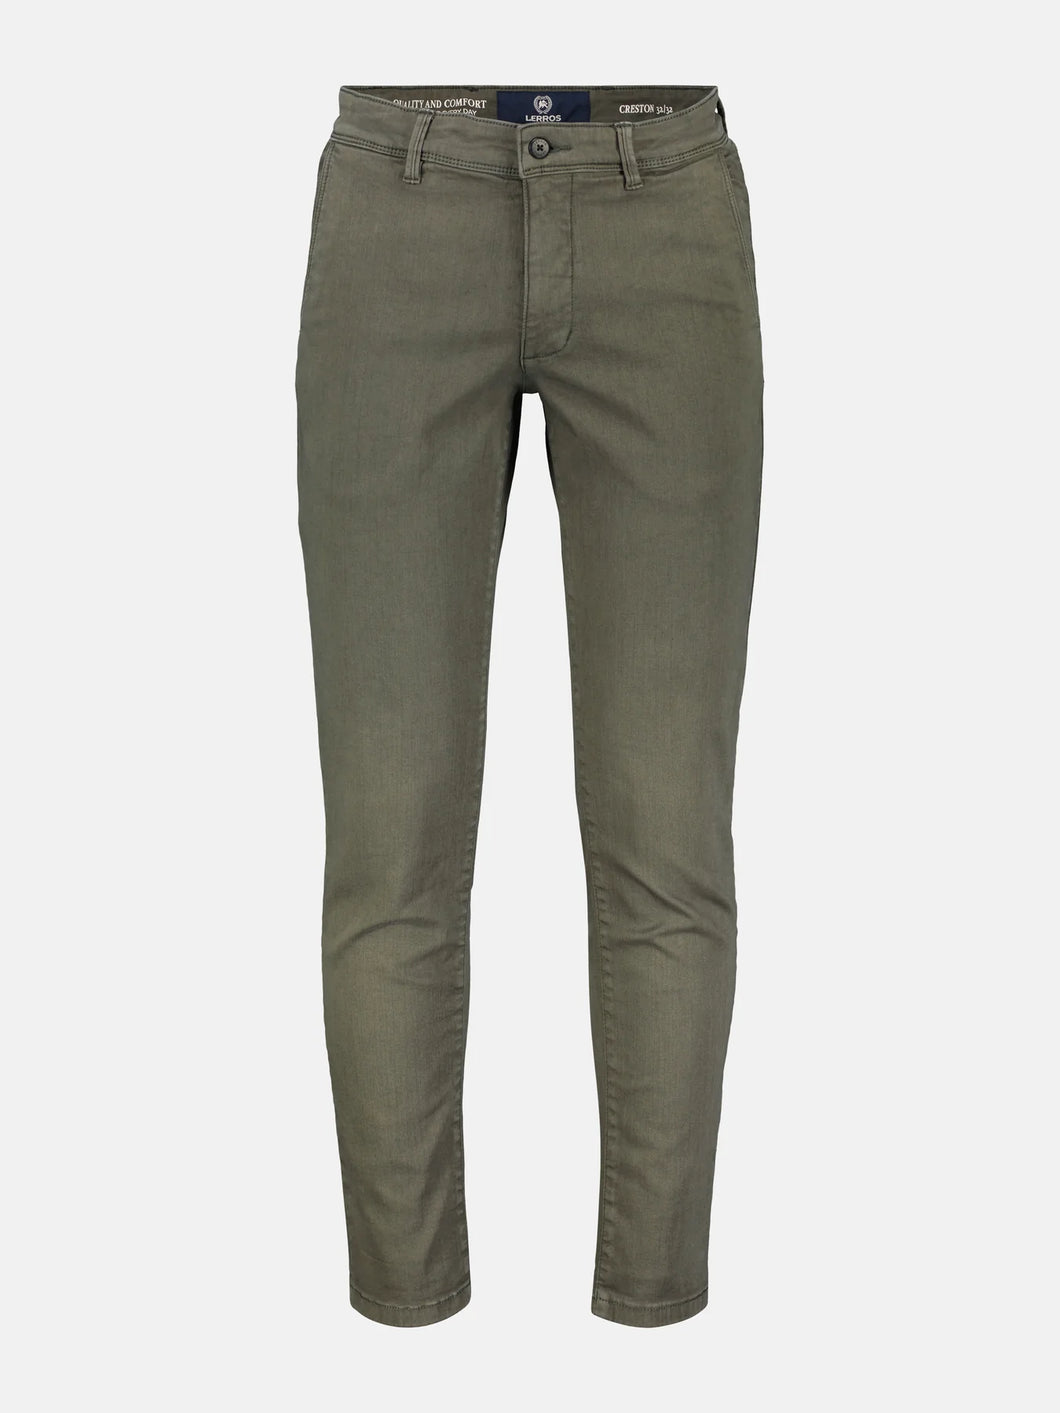 Lerros green chino trousers